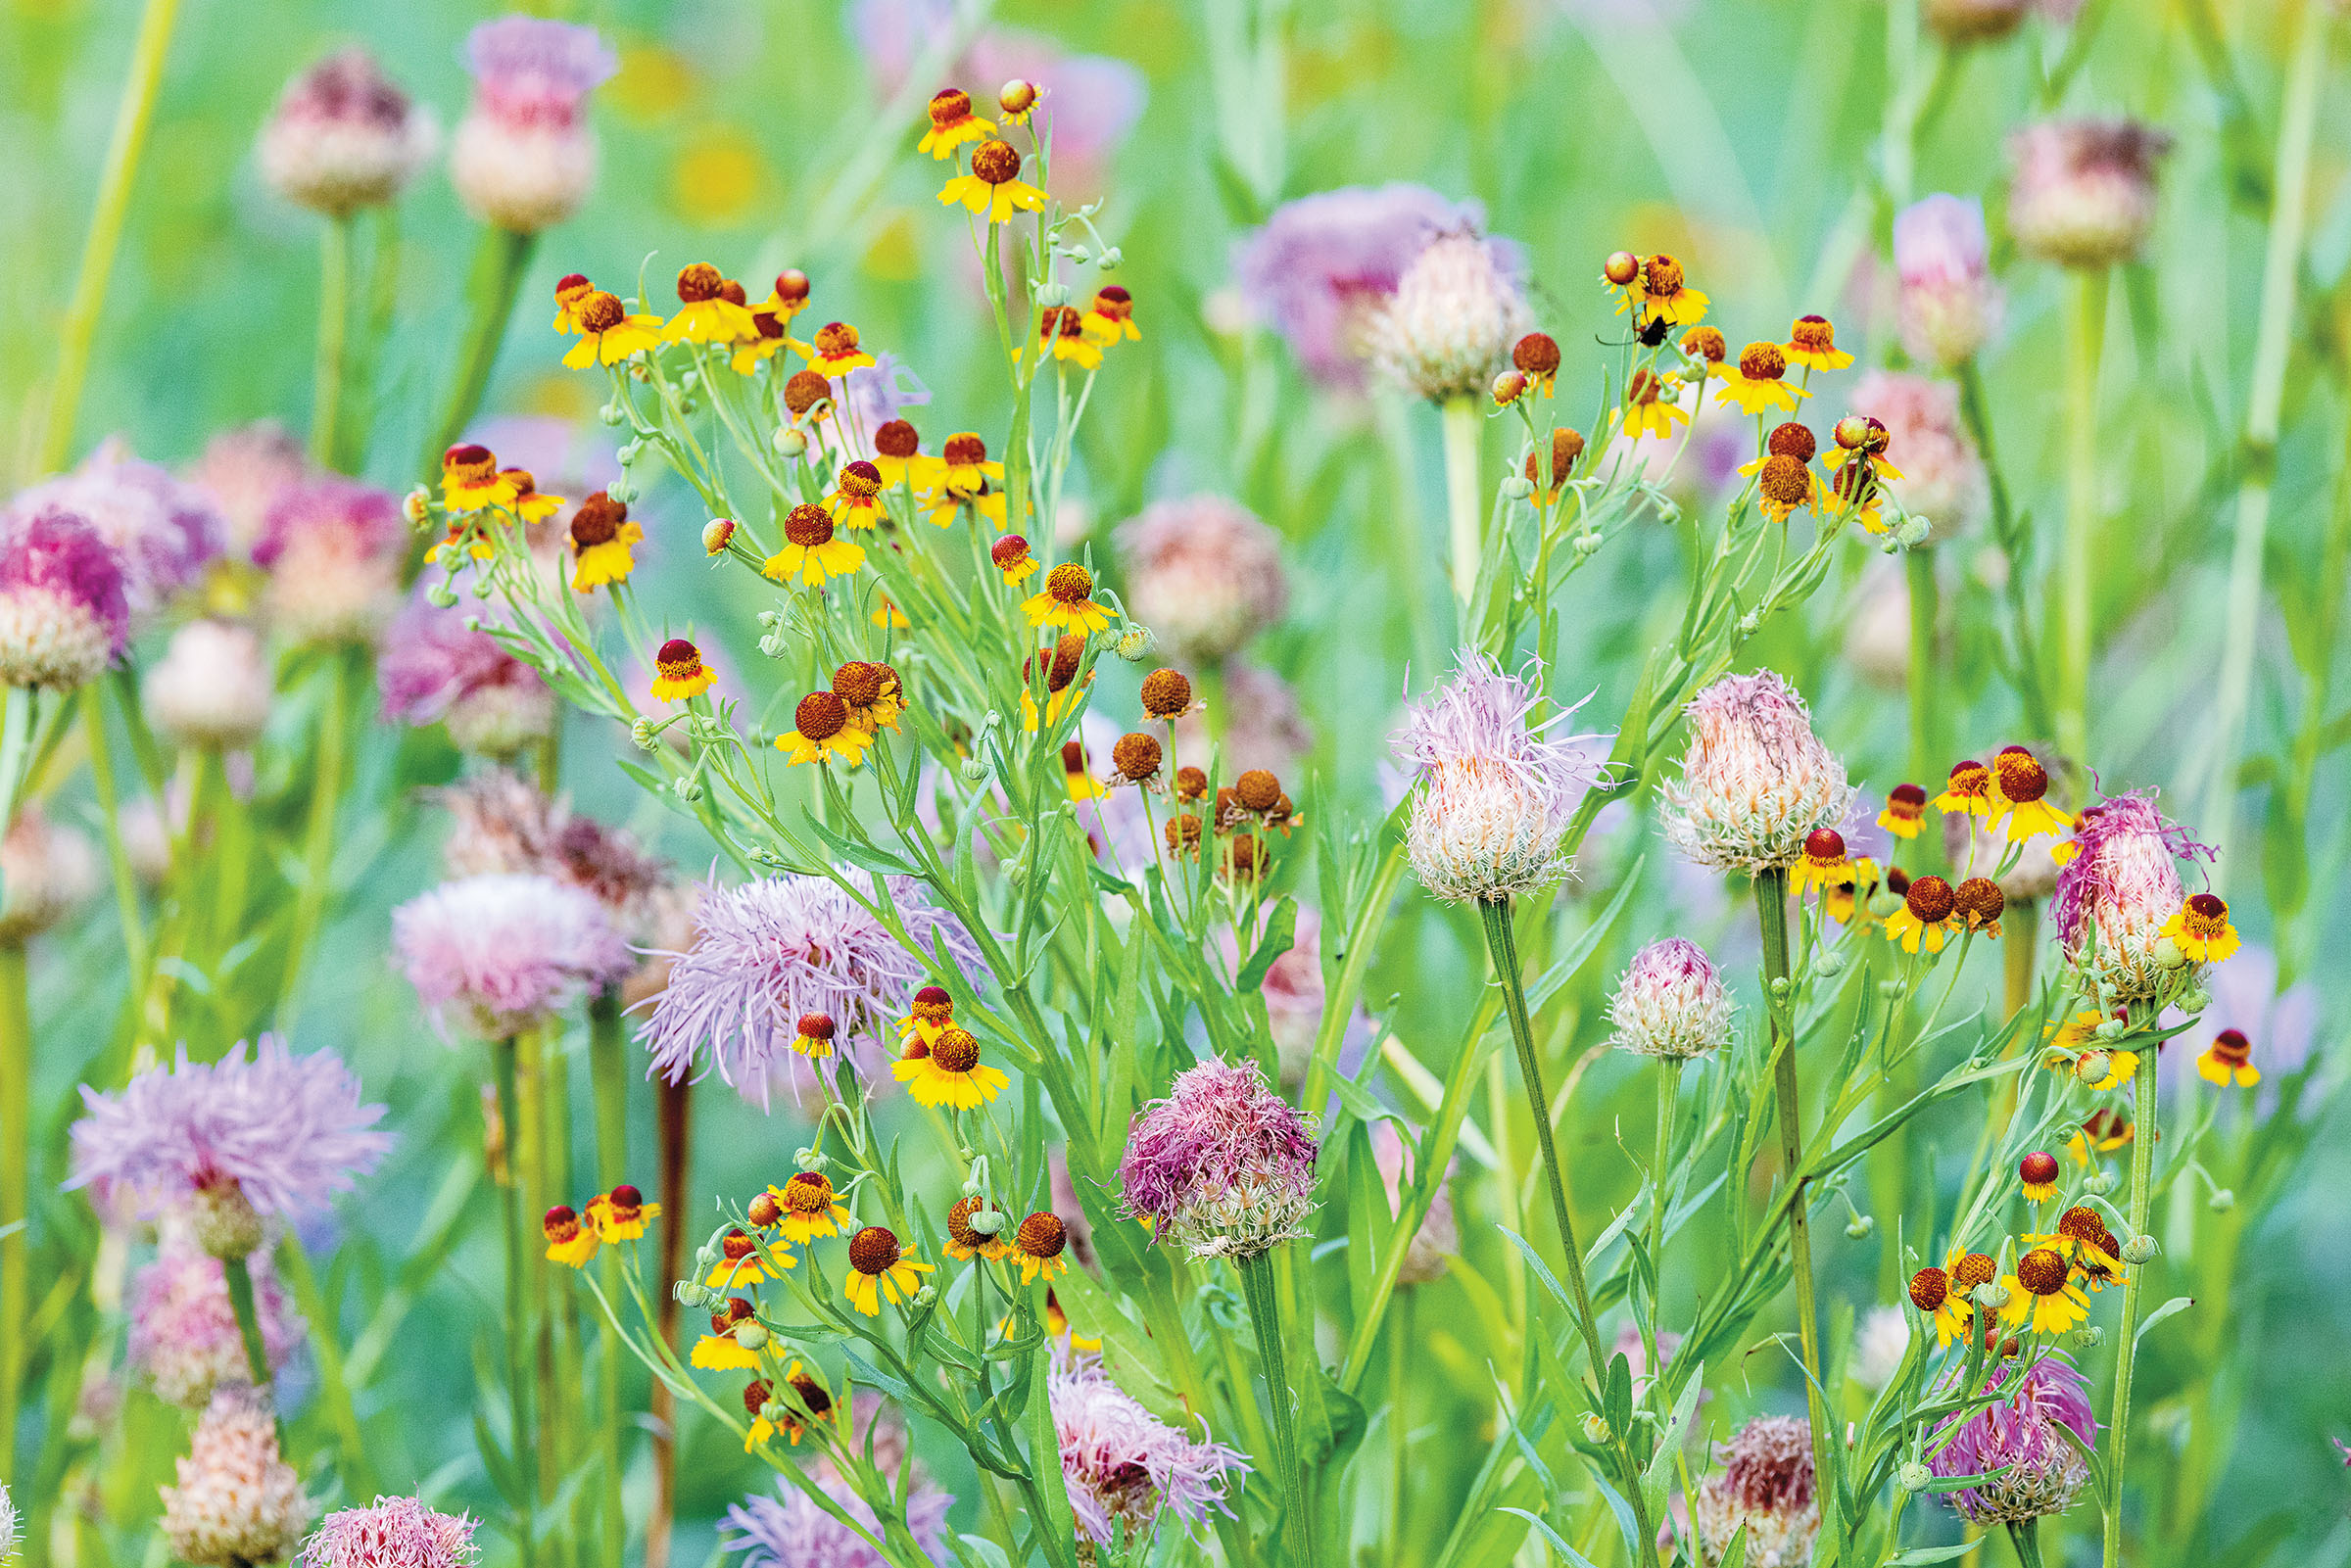 A collection of pink, yellow and red wildflowers in a field with green grass